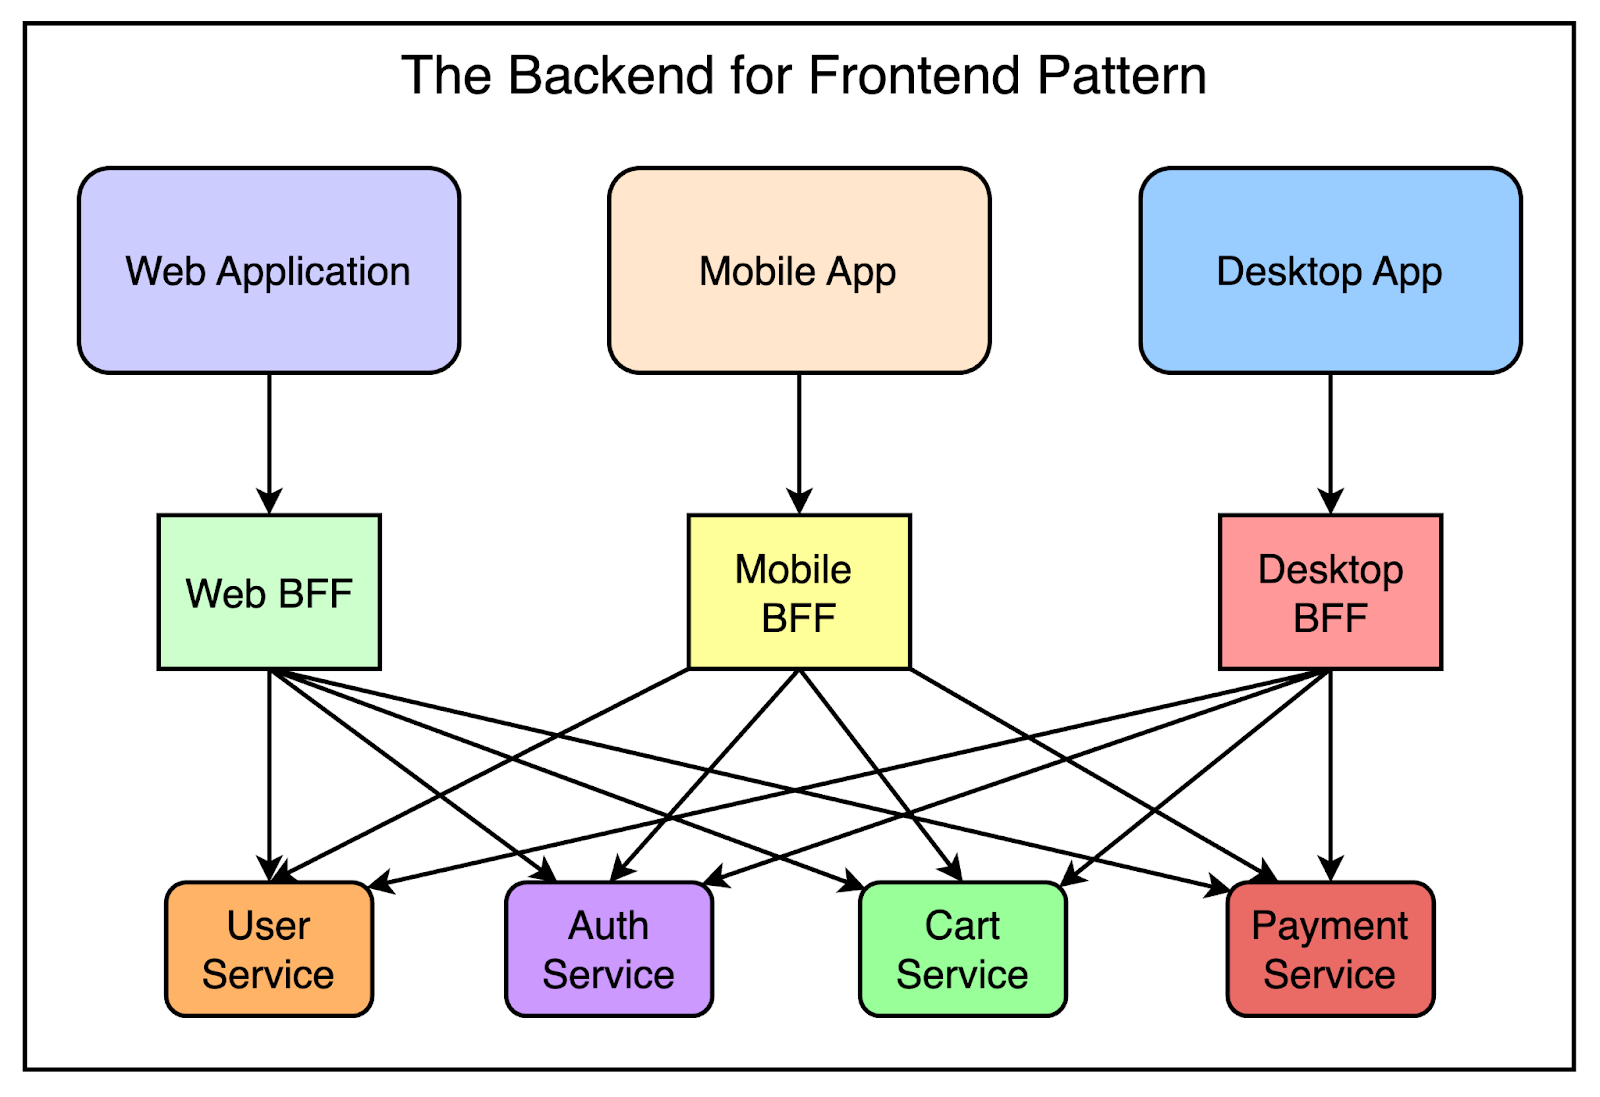 The Backend for Frontend Pattern at Netflix